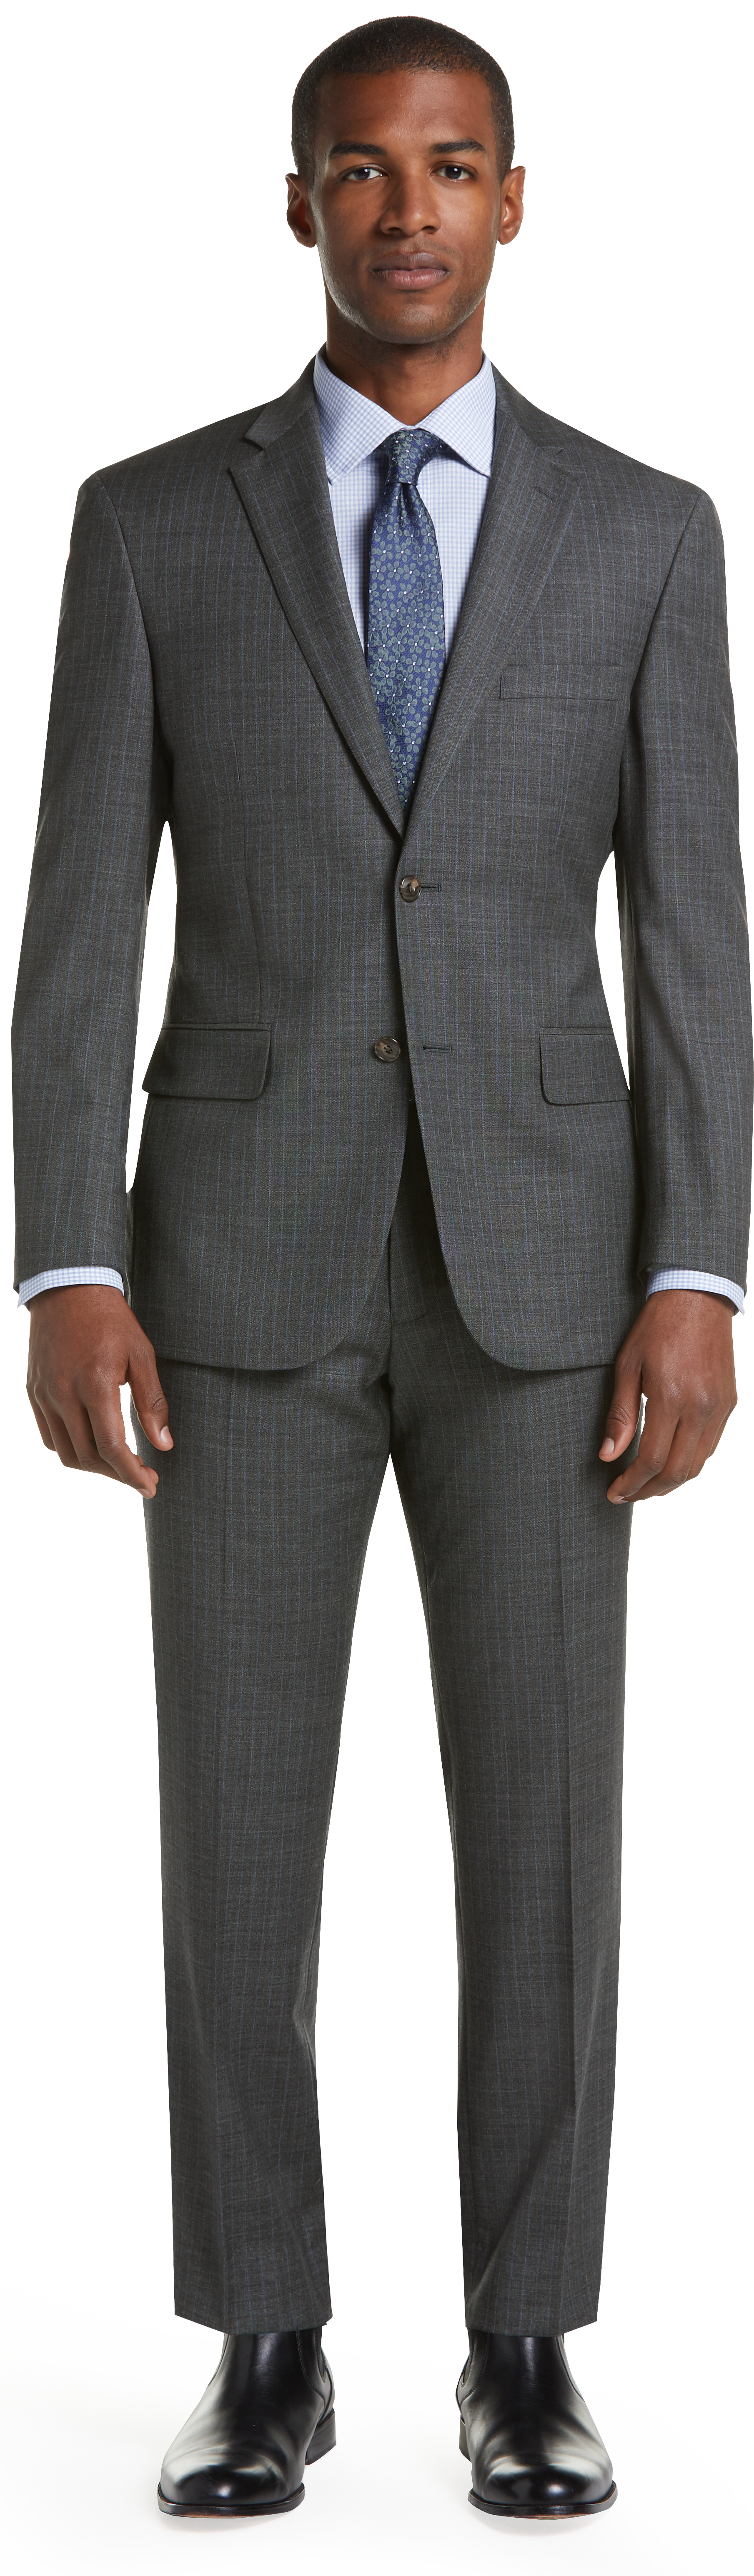 1905 Collection Tailored Fit Stripe Suit with brrr° comfort - 1905 ...